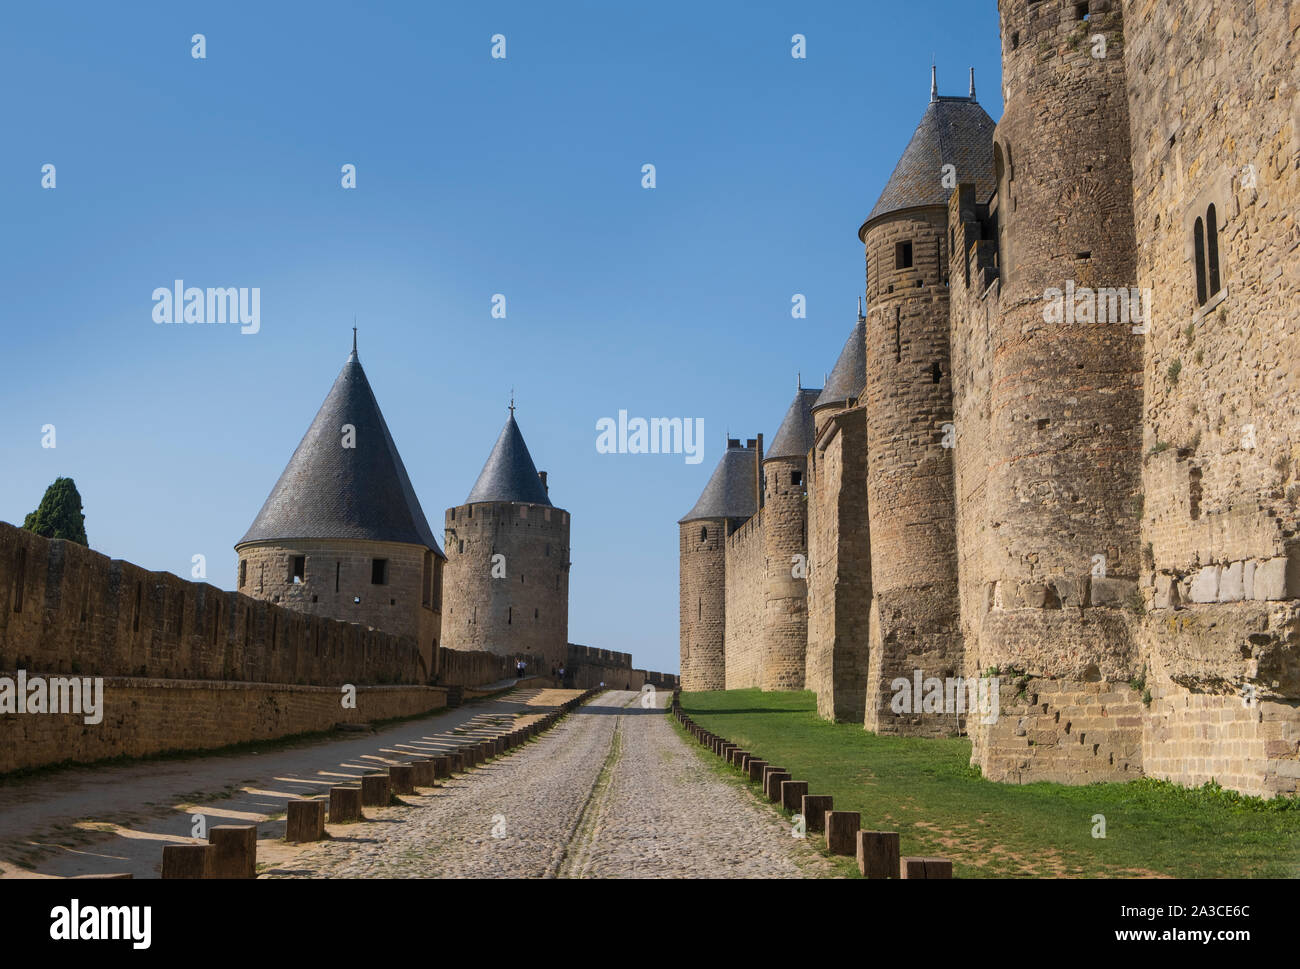 Walls of the citadel, Carcassonne, France, La Cite is the medieval citadel, a well preserved walled town and one of the most popular tourist destinati Stock Photo